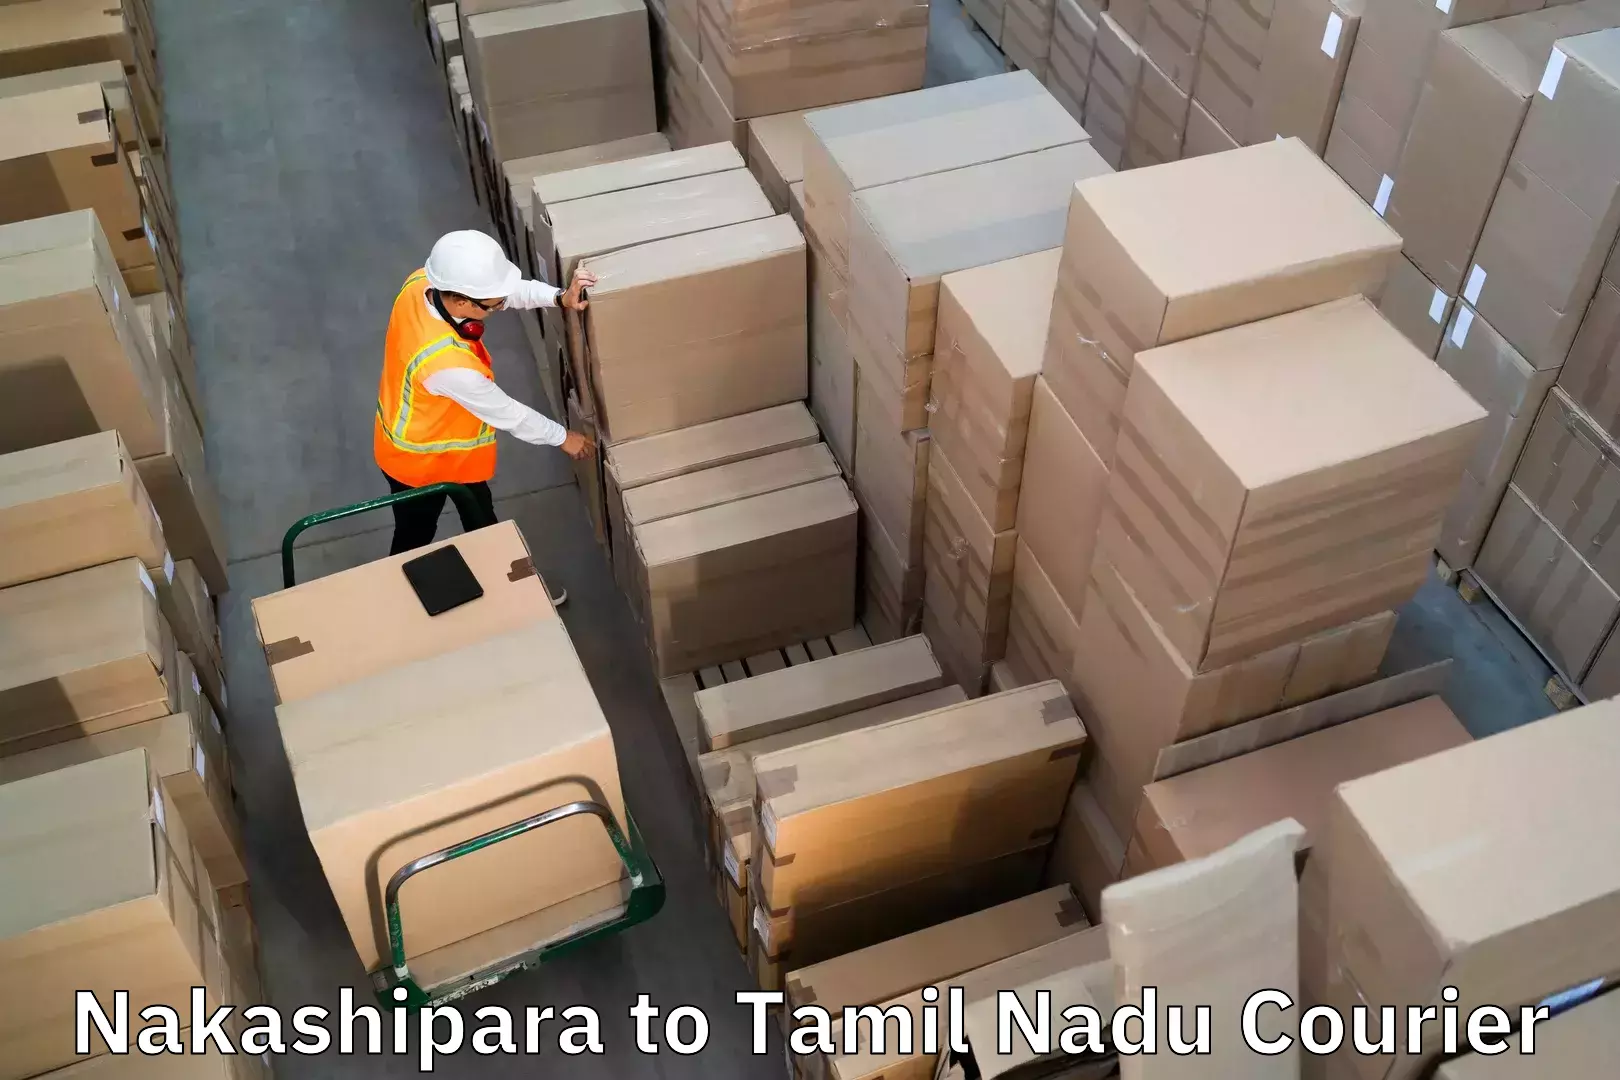 Baggage relocation service Nakashipara to Sri Ramachandra Institute of Higher Education and Research Chennai